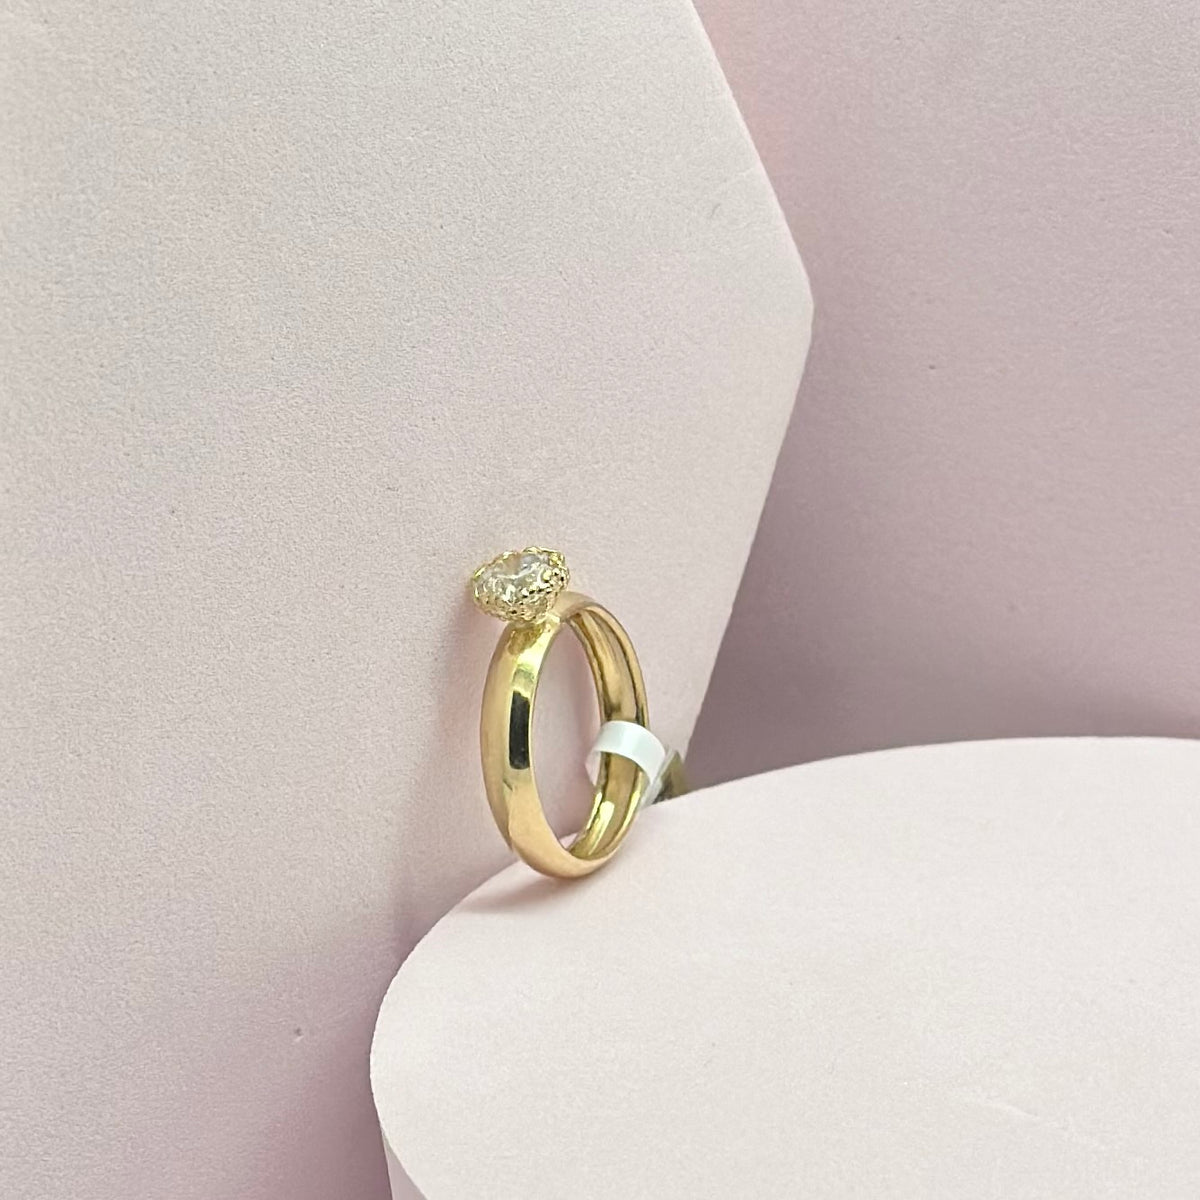 18K Yellow Gold - Single Stone Ring (Sizes Available)